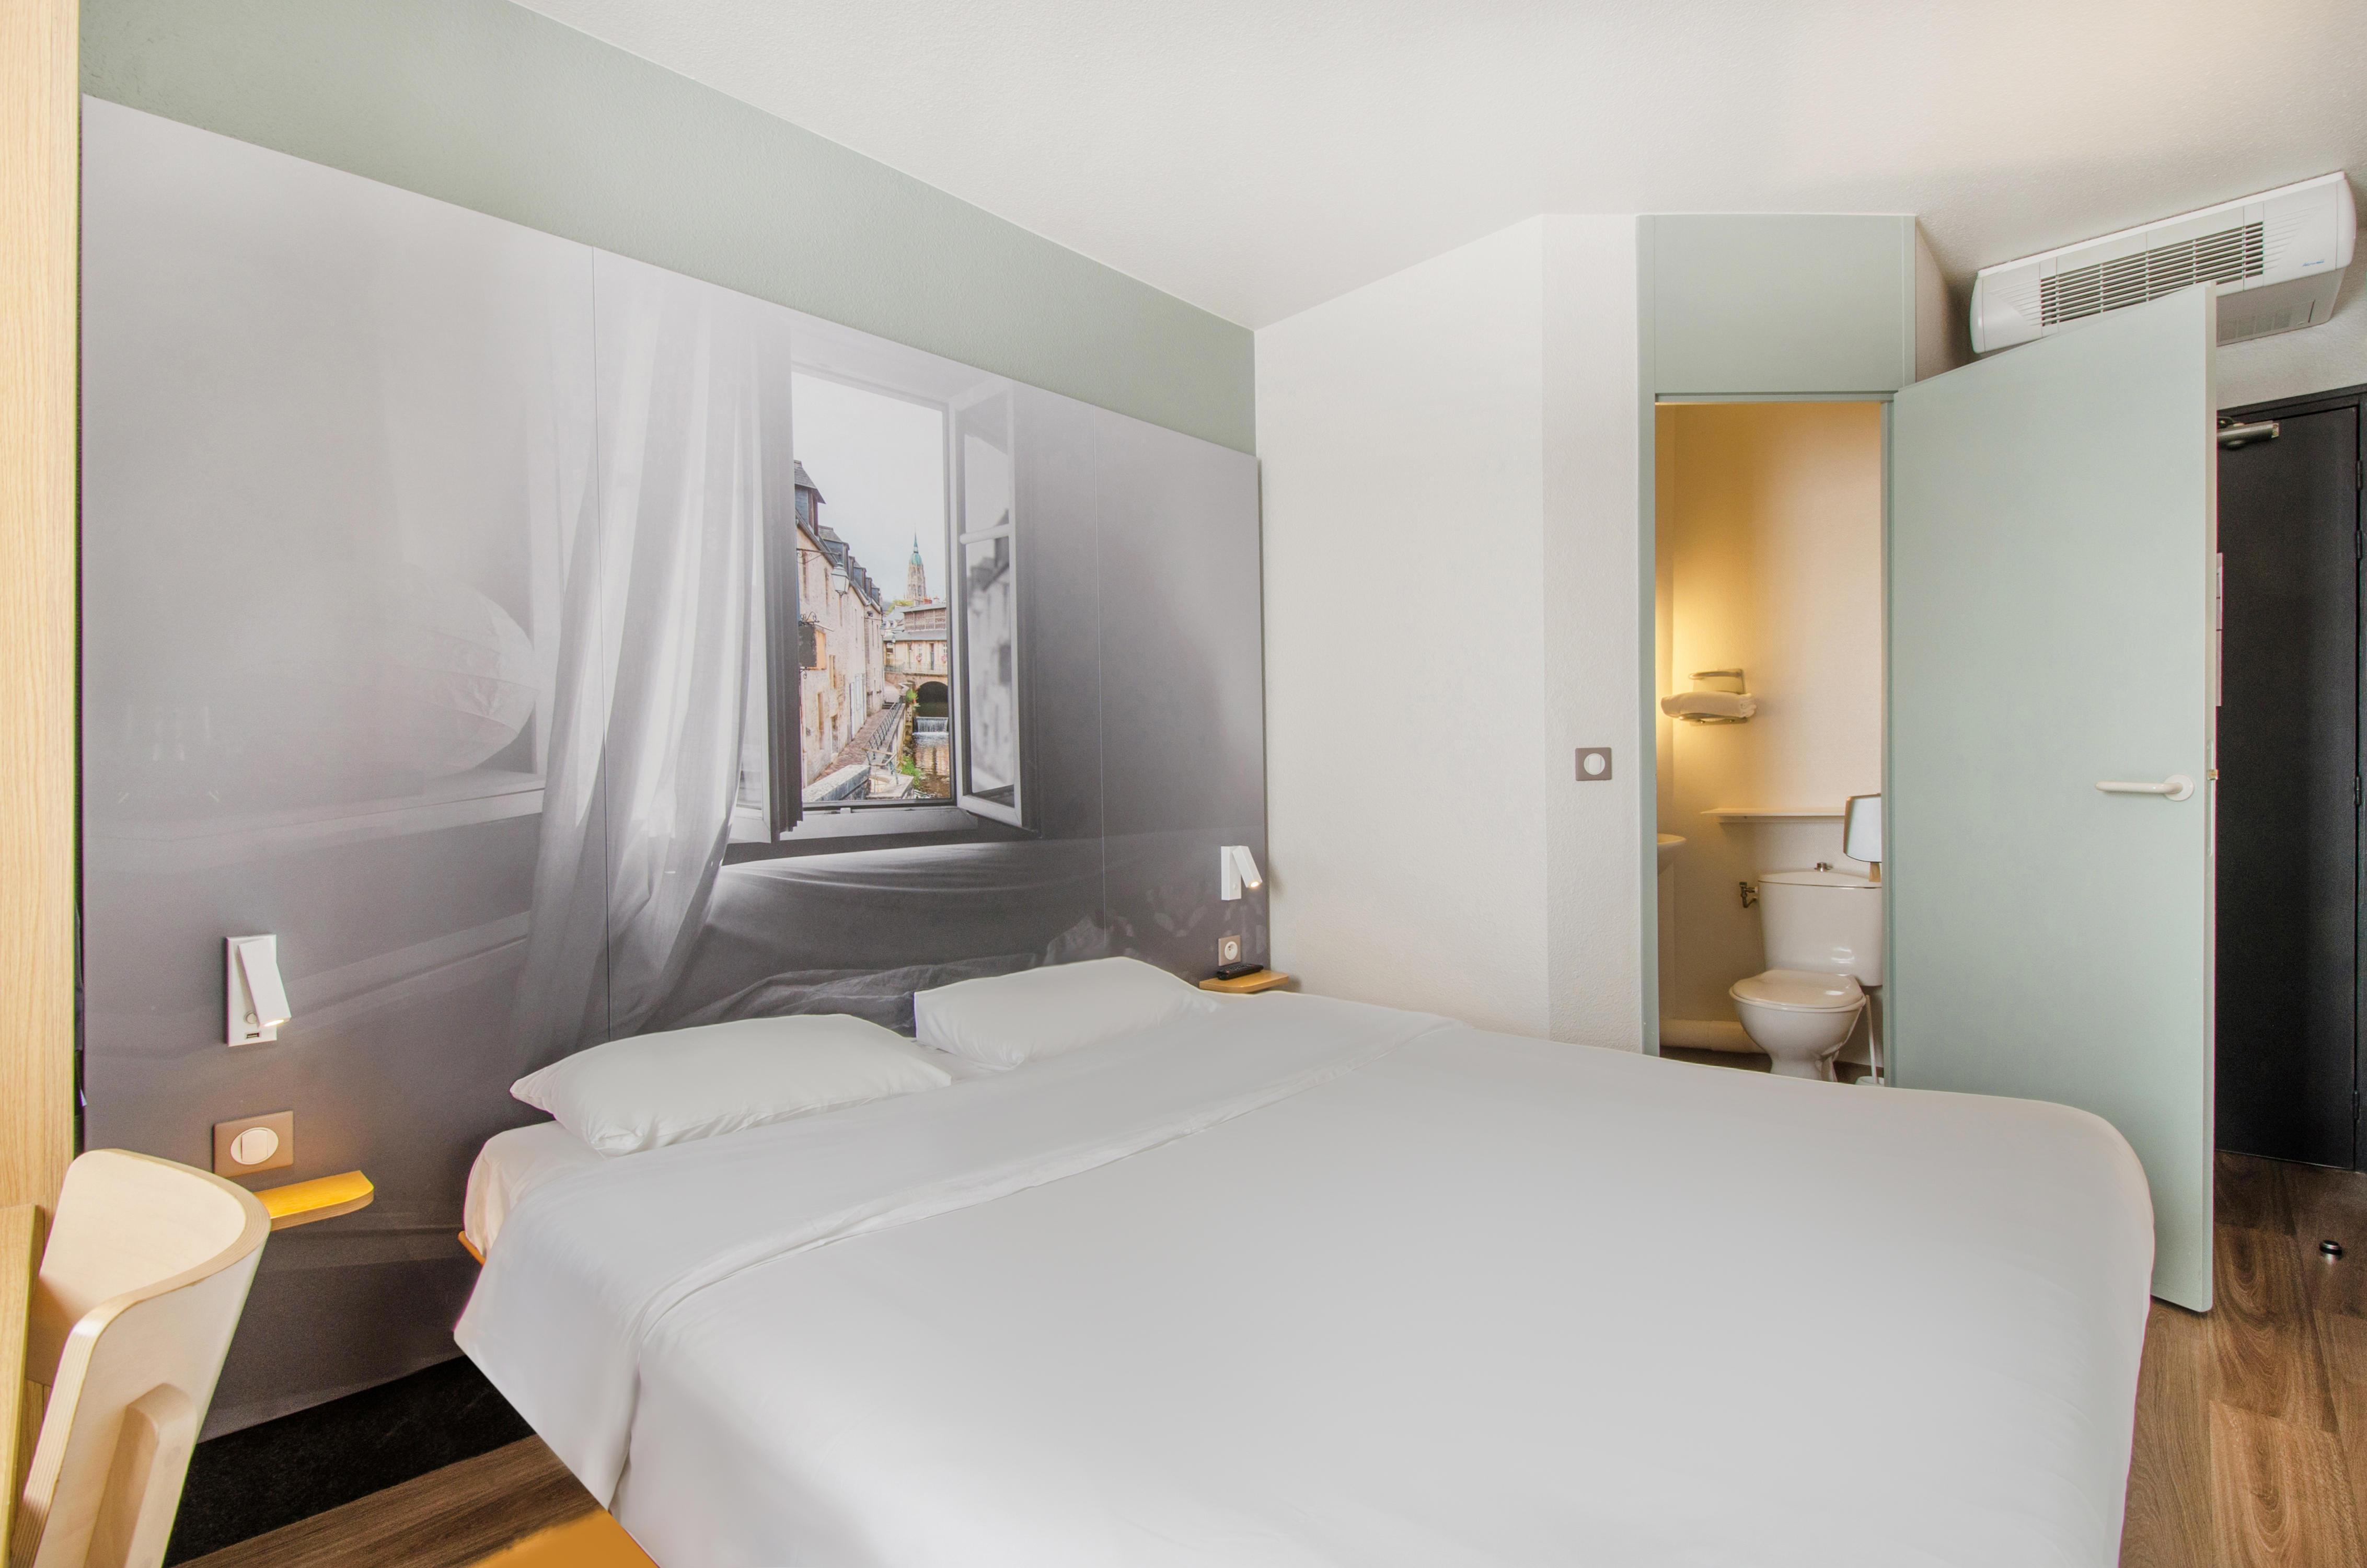 B&b Hotel Chartres Le Coudray Le Coudray